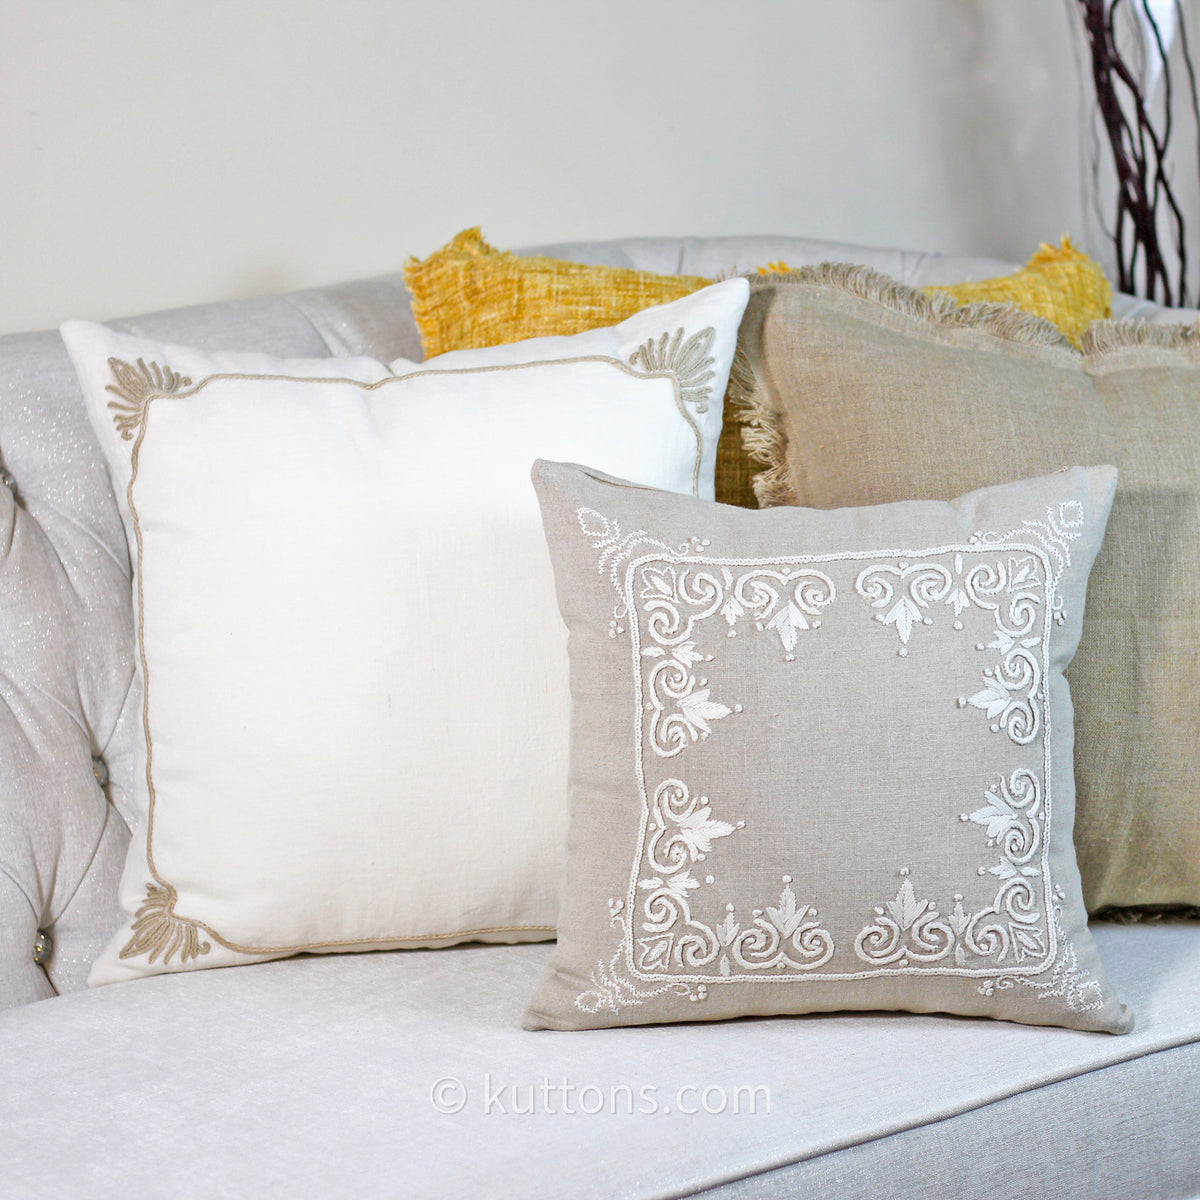 cushion pillows made from linen fabric